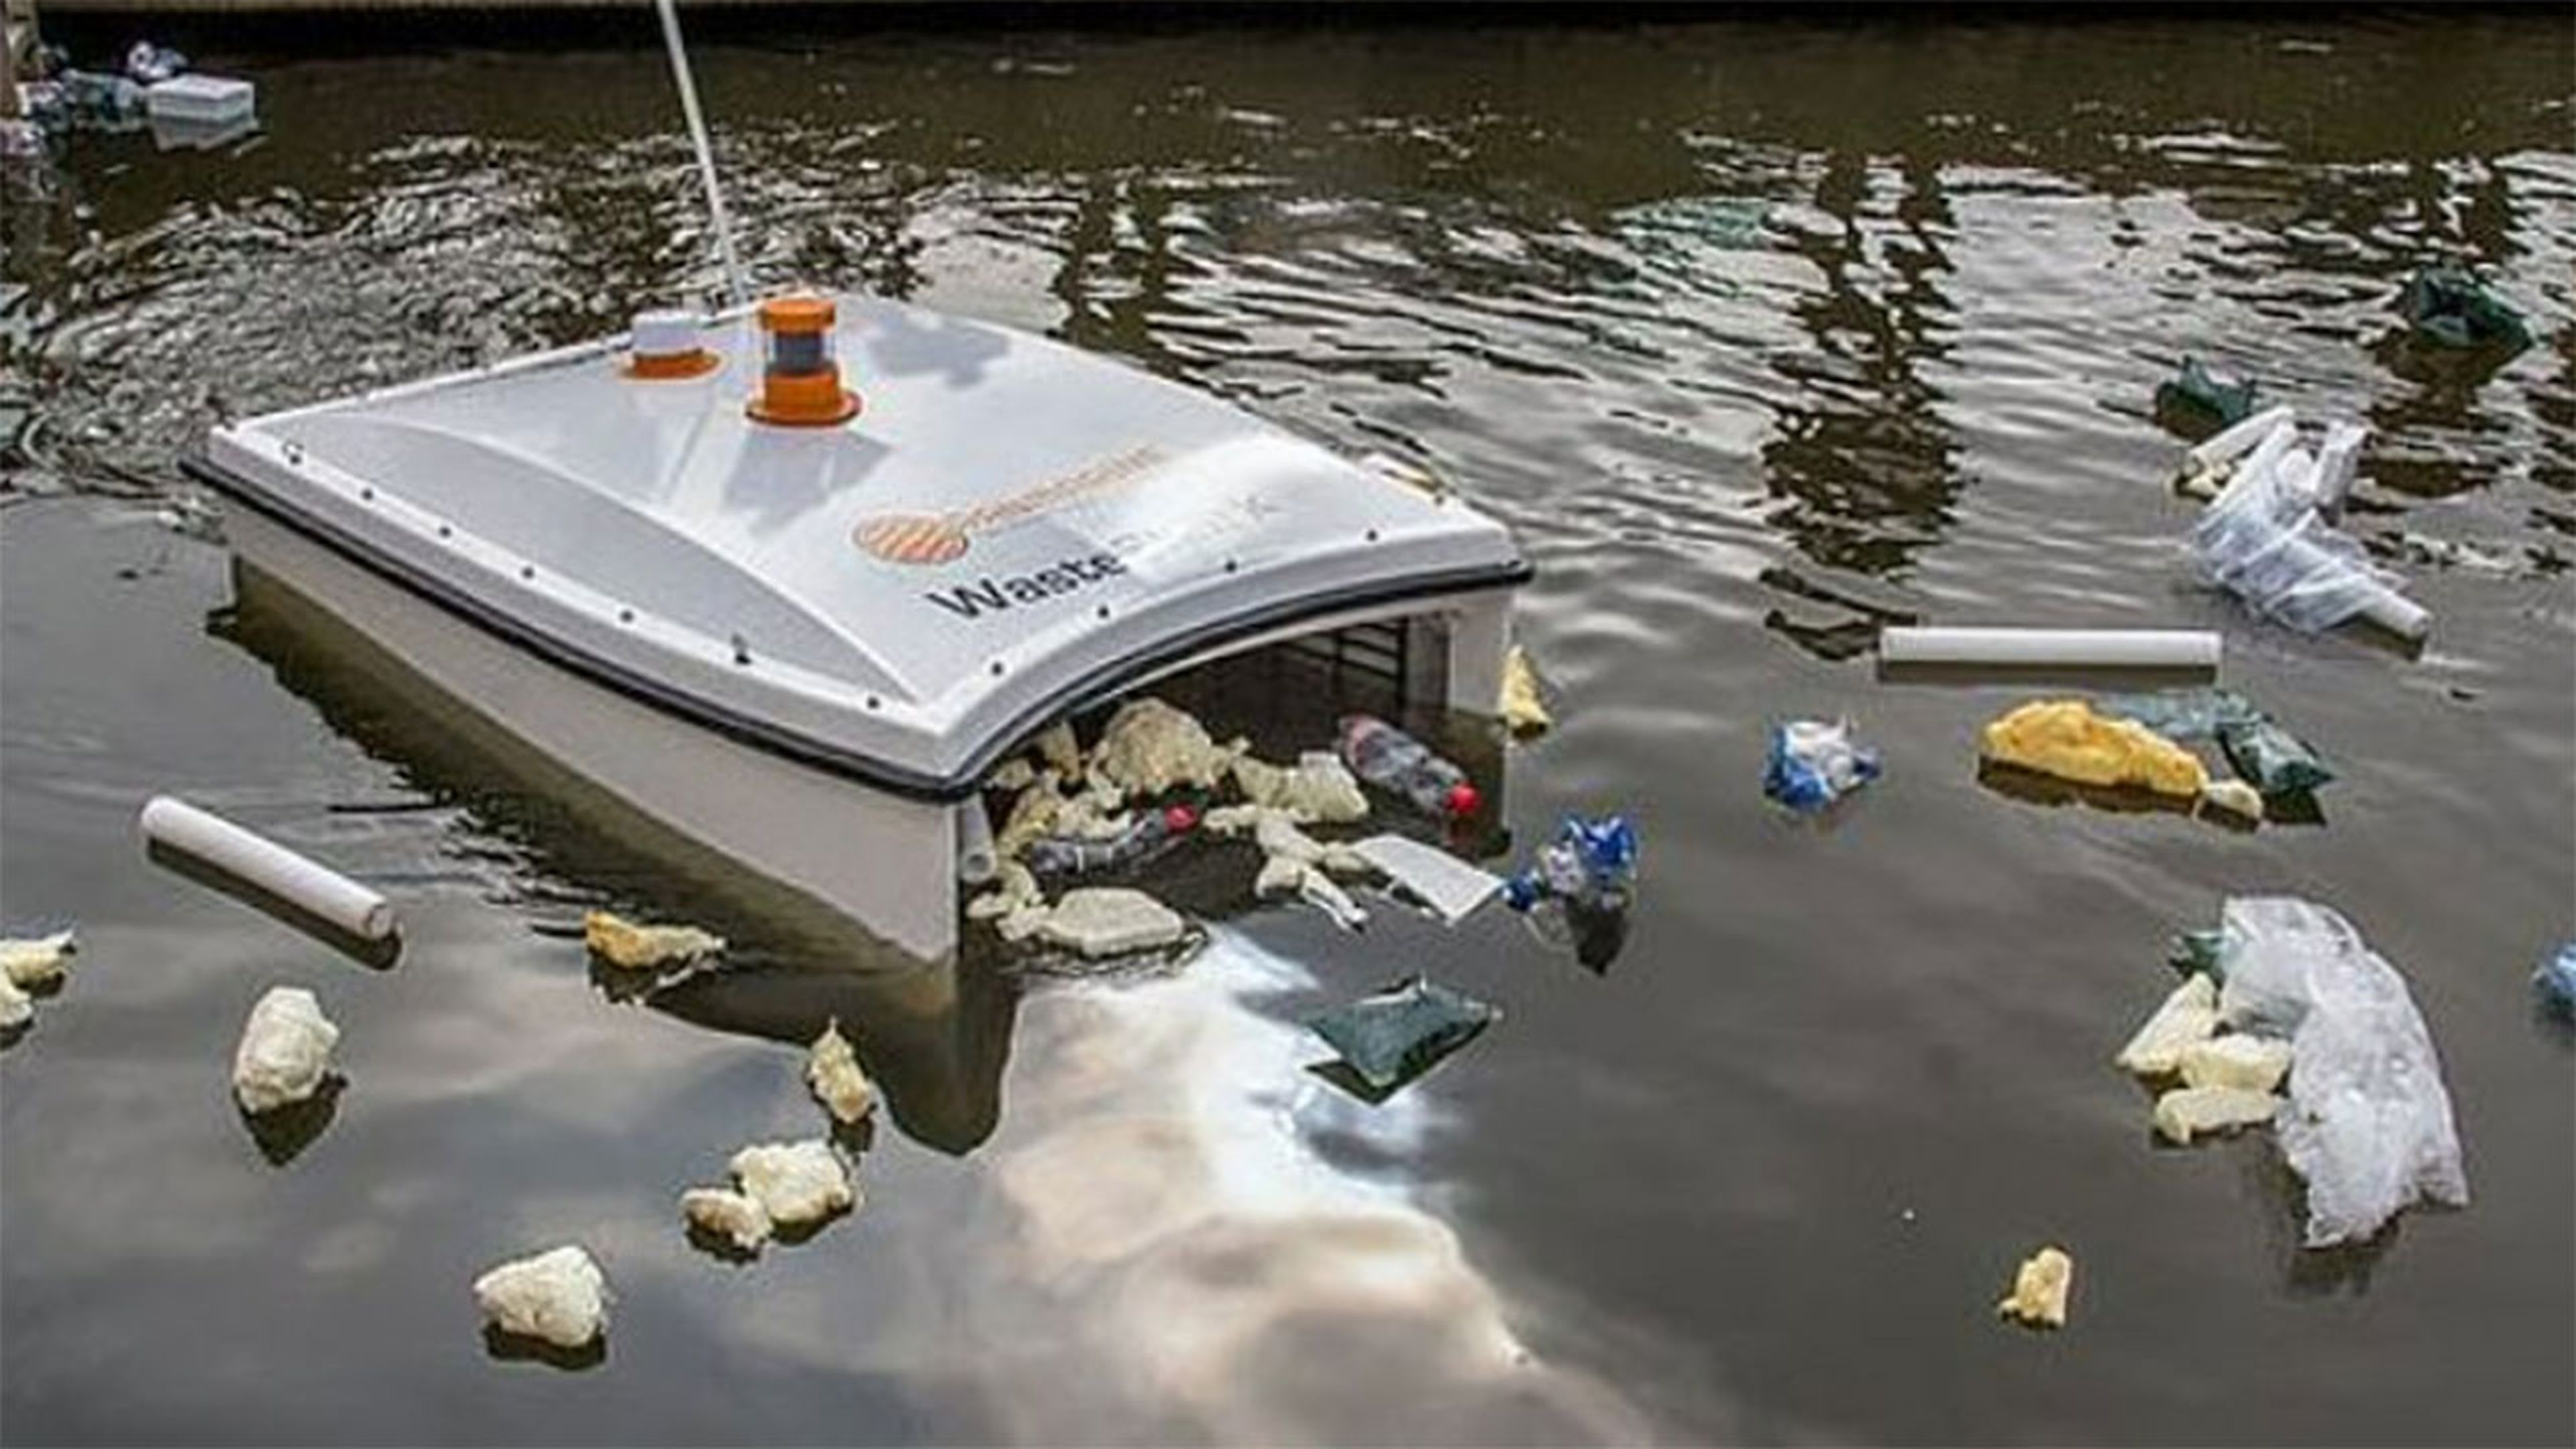 A robot shark capable of swallowing all the plastic garbage in a river